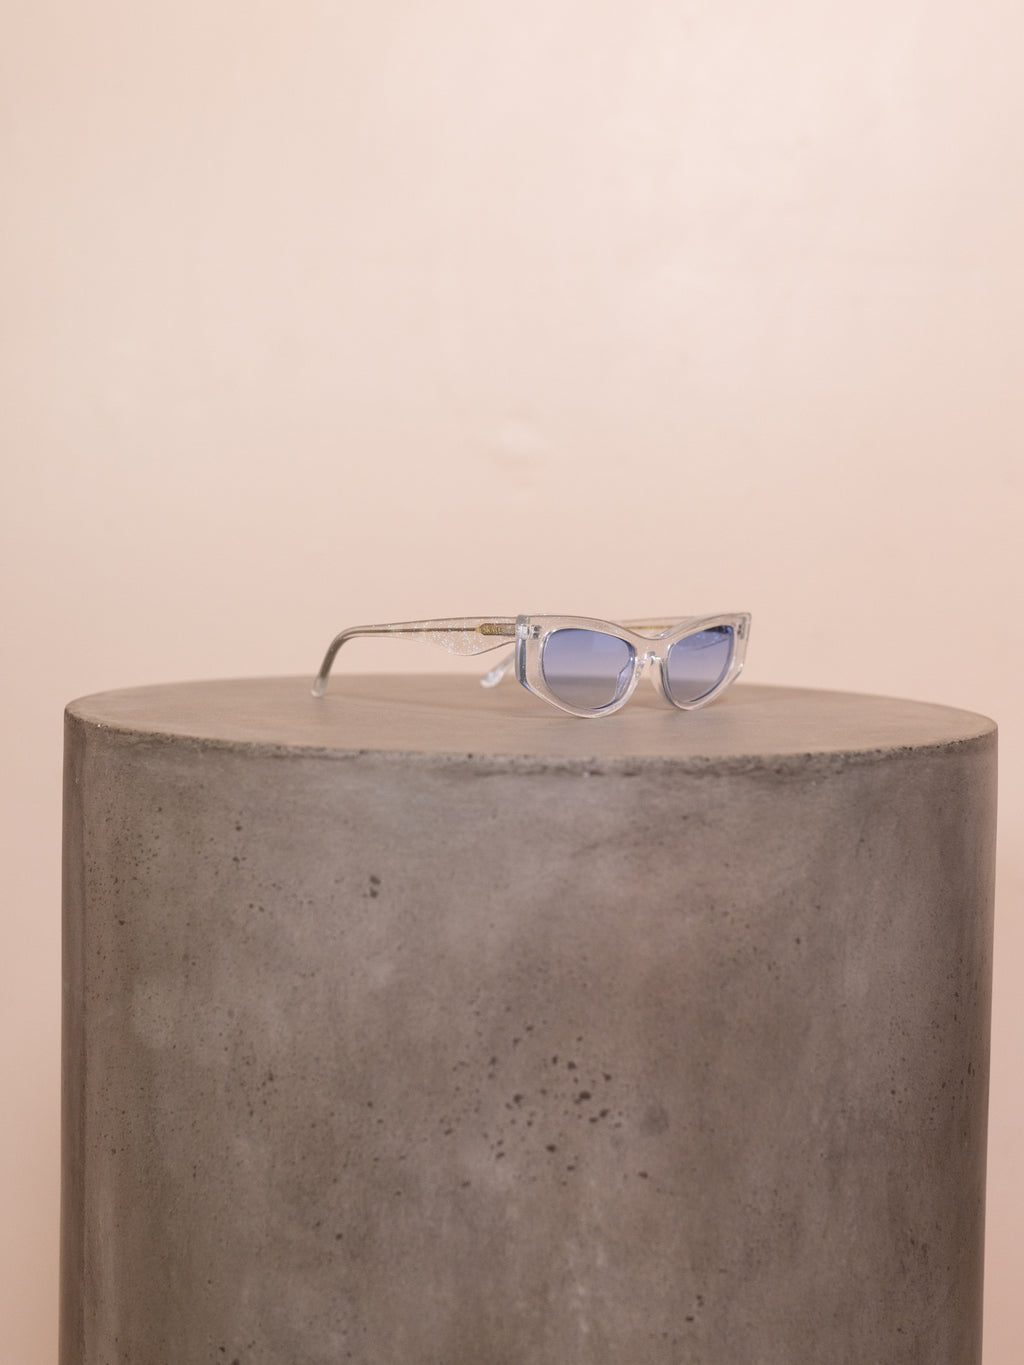 Clear sunglasses with blue lenses on pedestal against pink background.